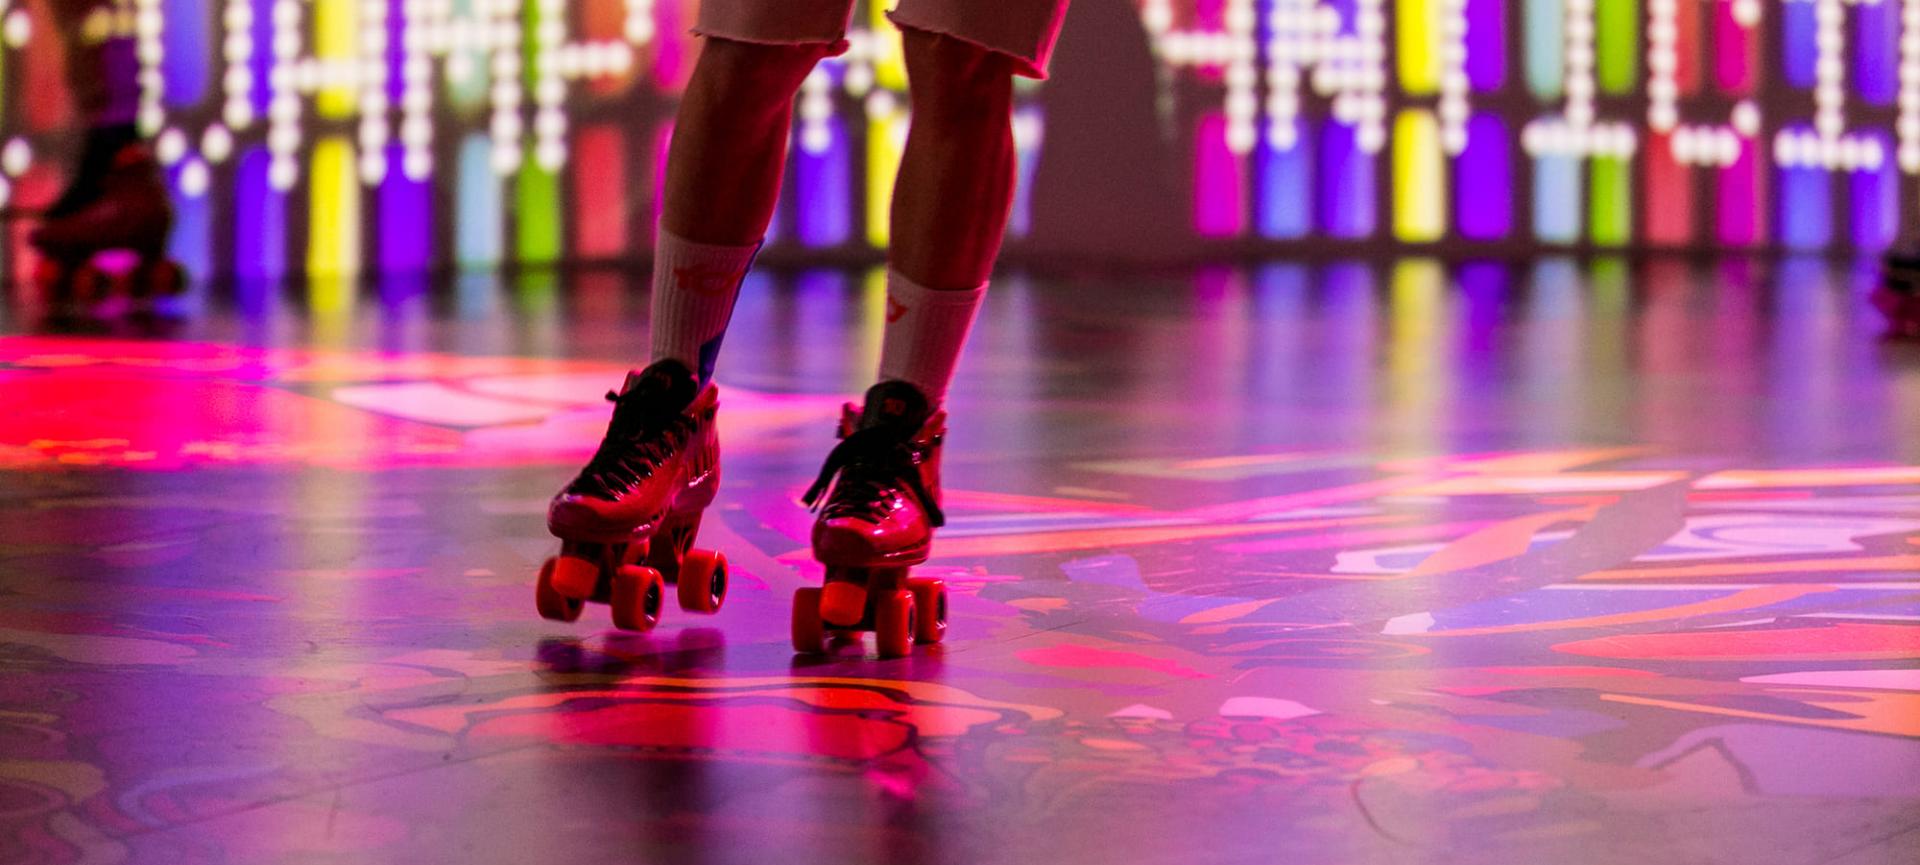 Someone rollerskating on a colourful floor